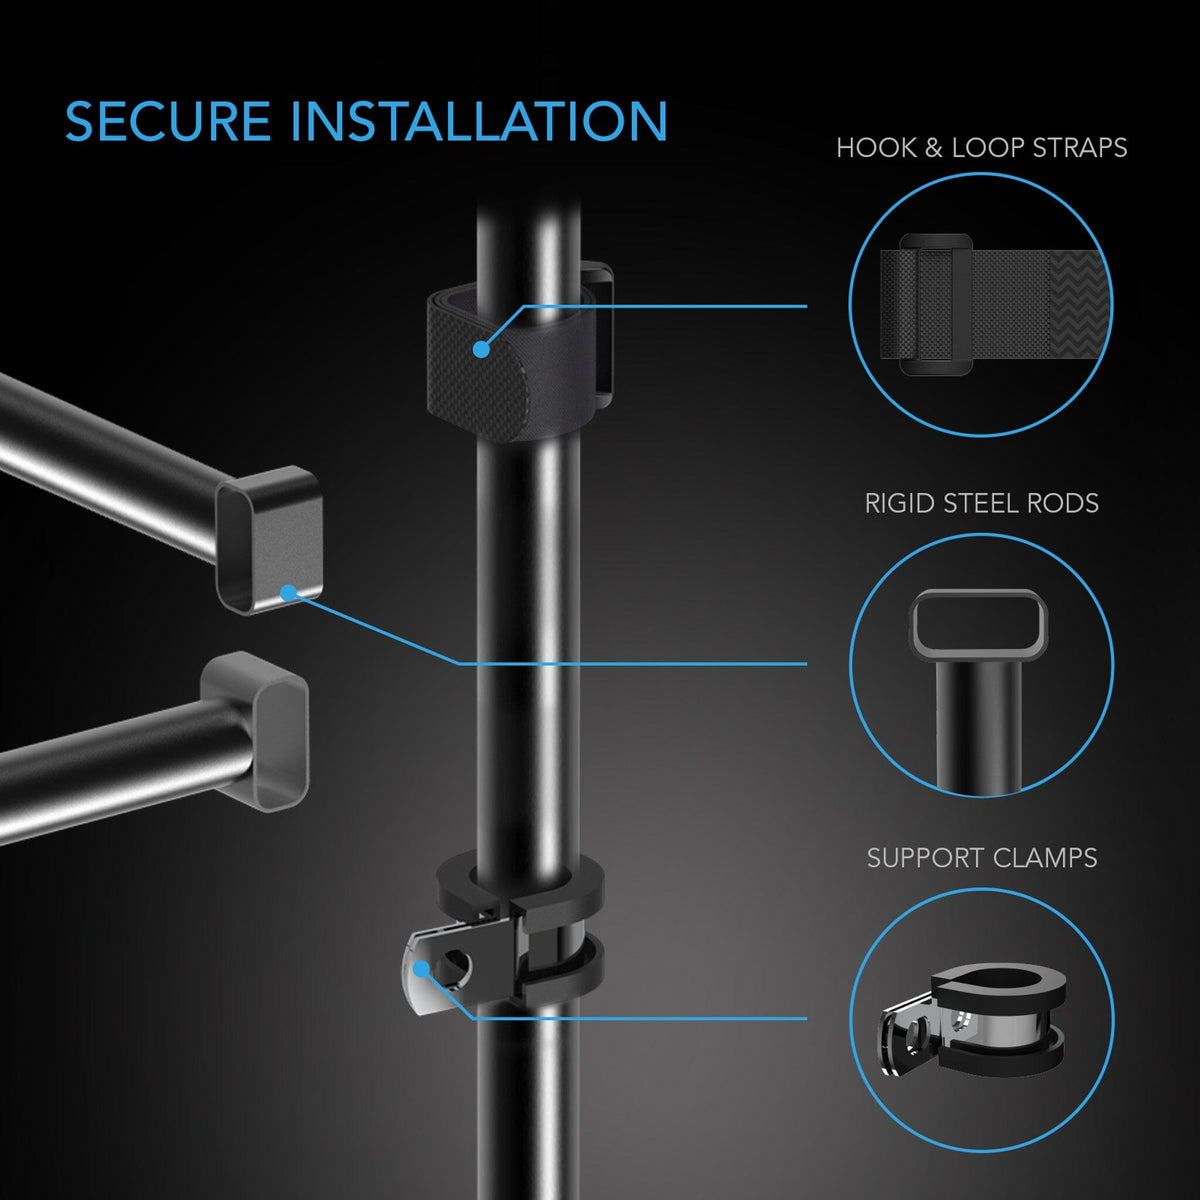 Secure installation for tent